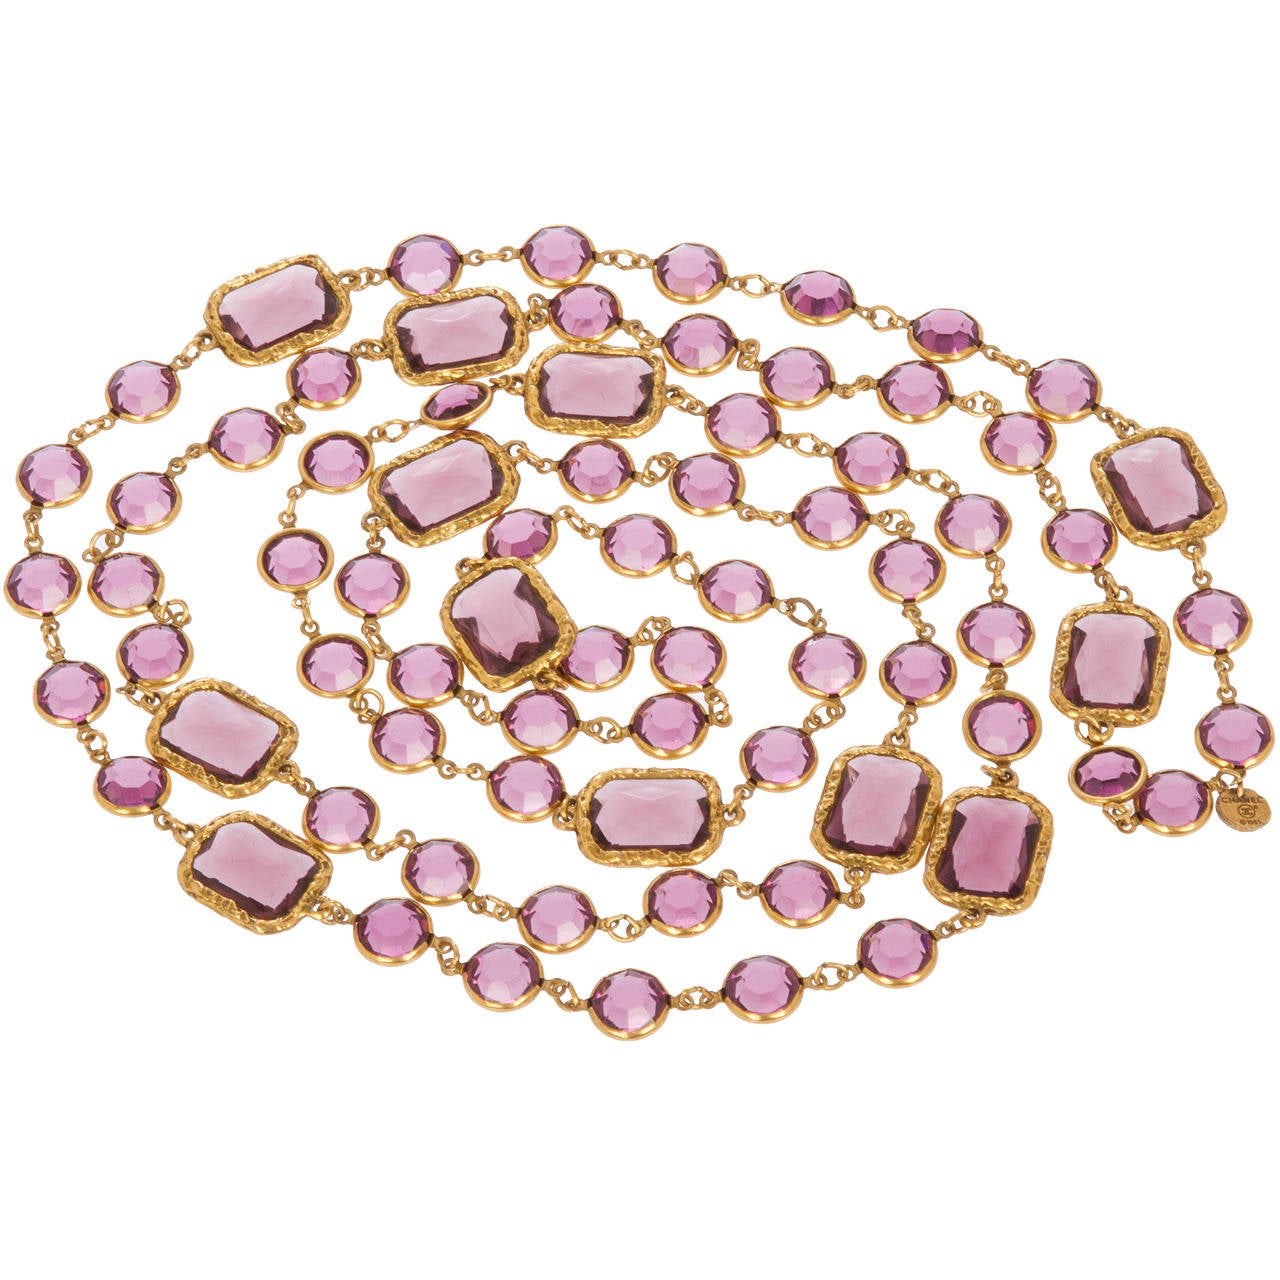 CHANEL Purple Chicklet Necklace